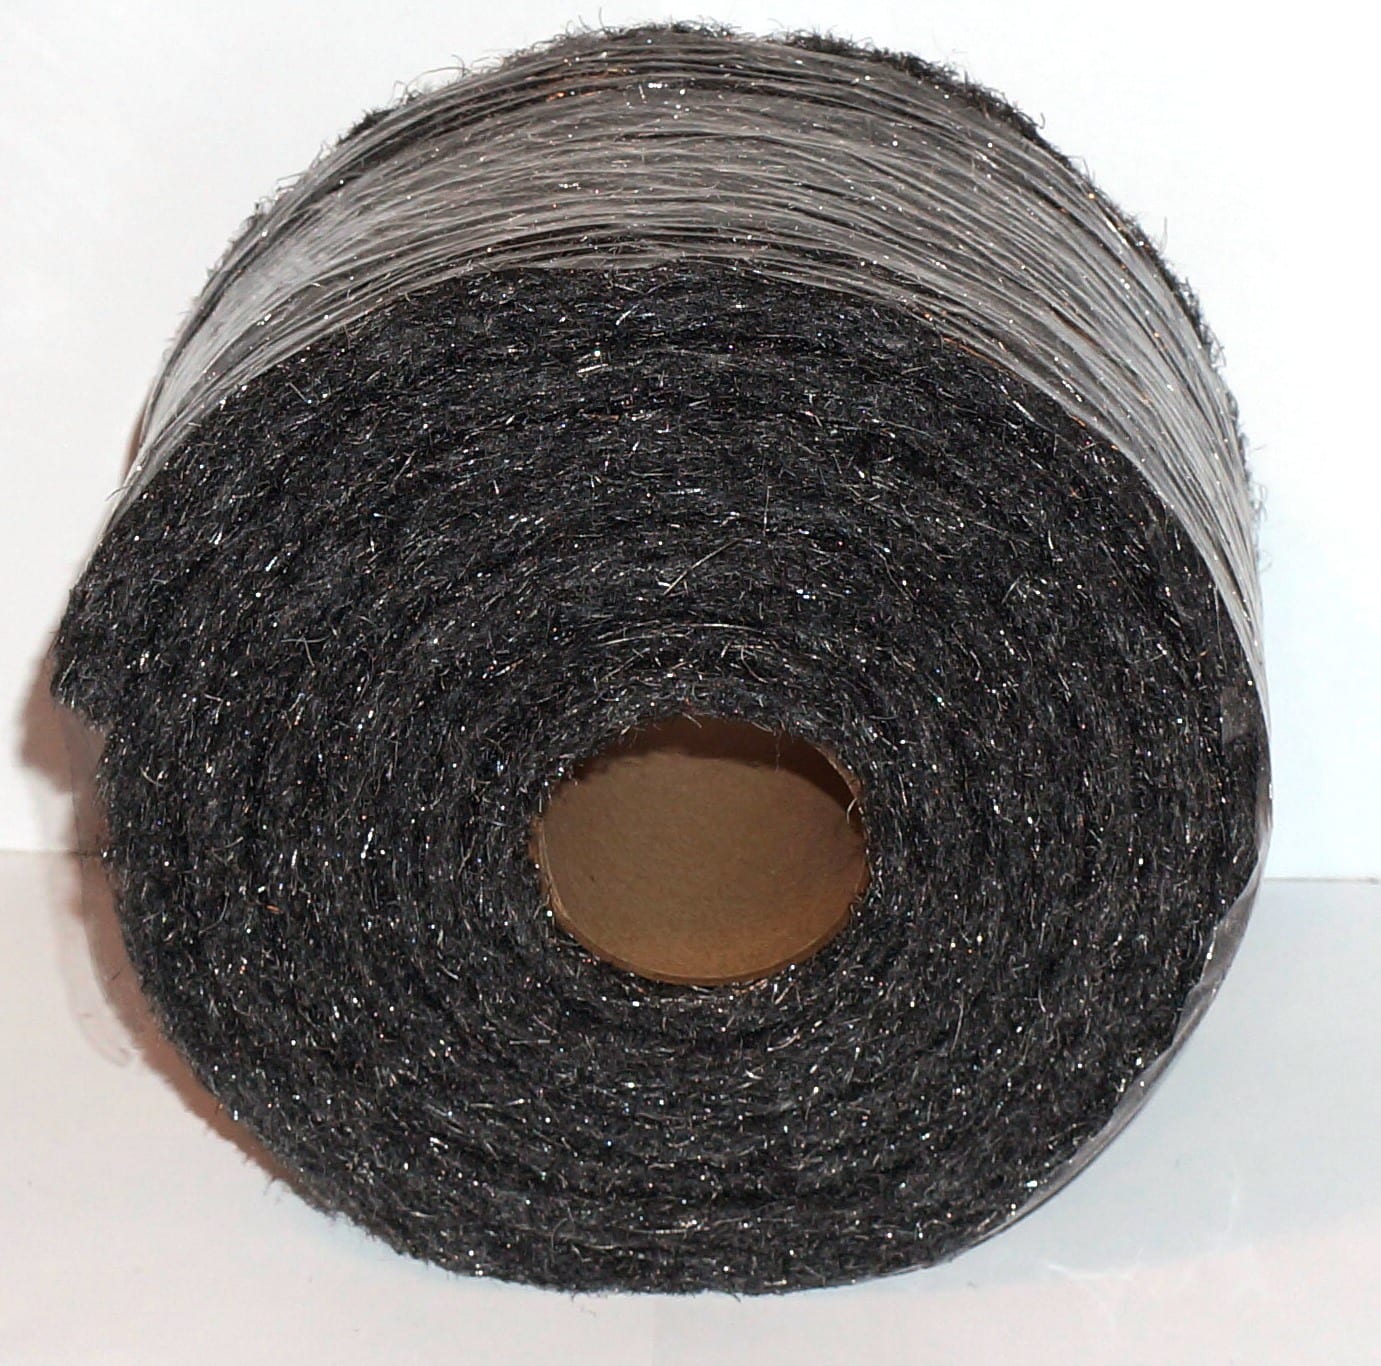 Xcluder 3 Rolls of 4 x 5' Stainless Steel Wool Rodent Control Fill Fabric  162743 - The Home Depot